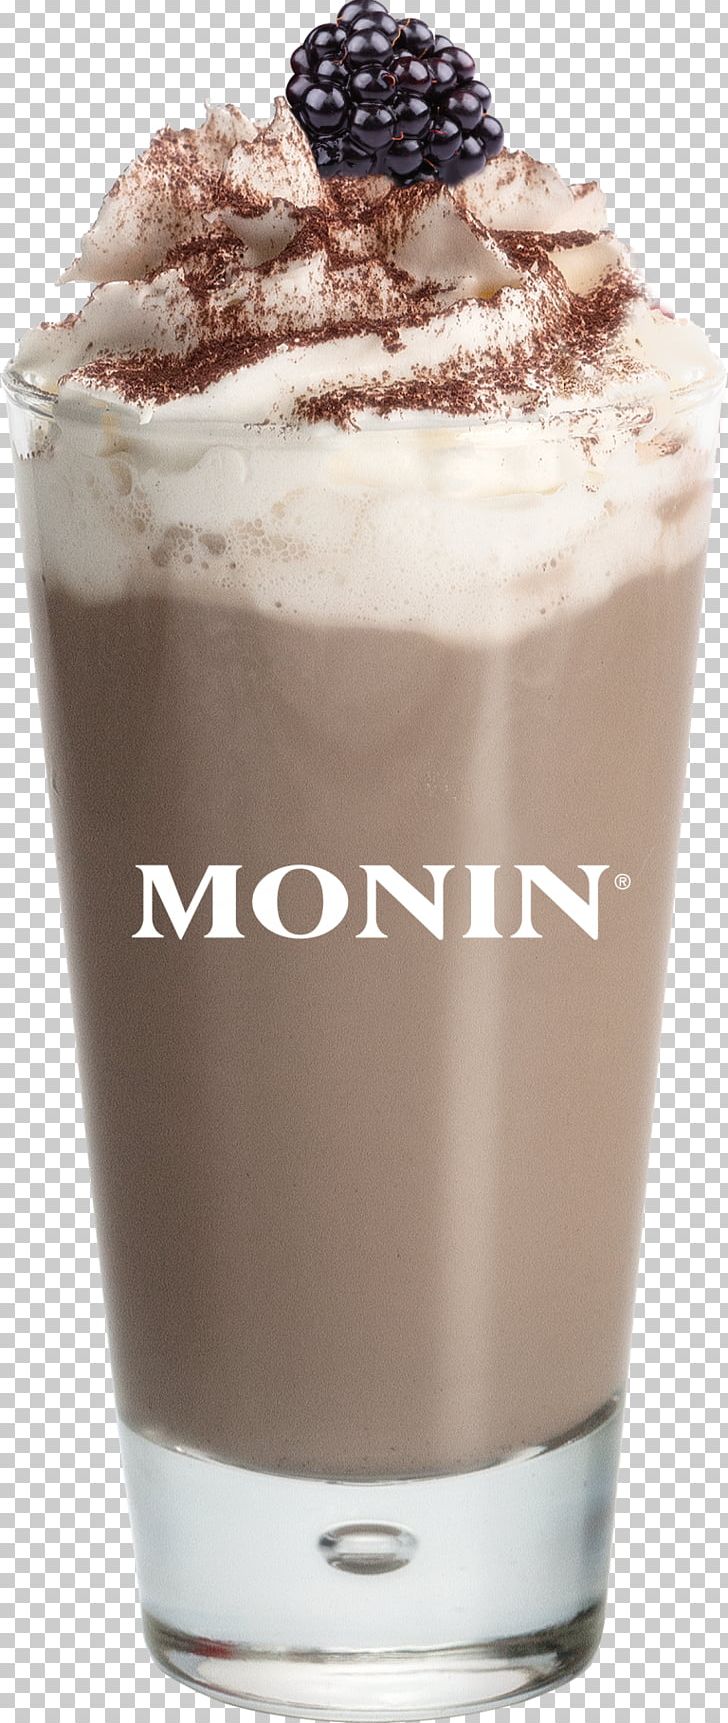 Milk Caffè Mocha Egg Cream Iced Coffee Frappé Coffee PNG, Clipart, Caffe Mocha, Cream, Dairy Product, Dessert, Drink Free PNG Download